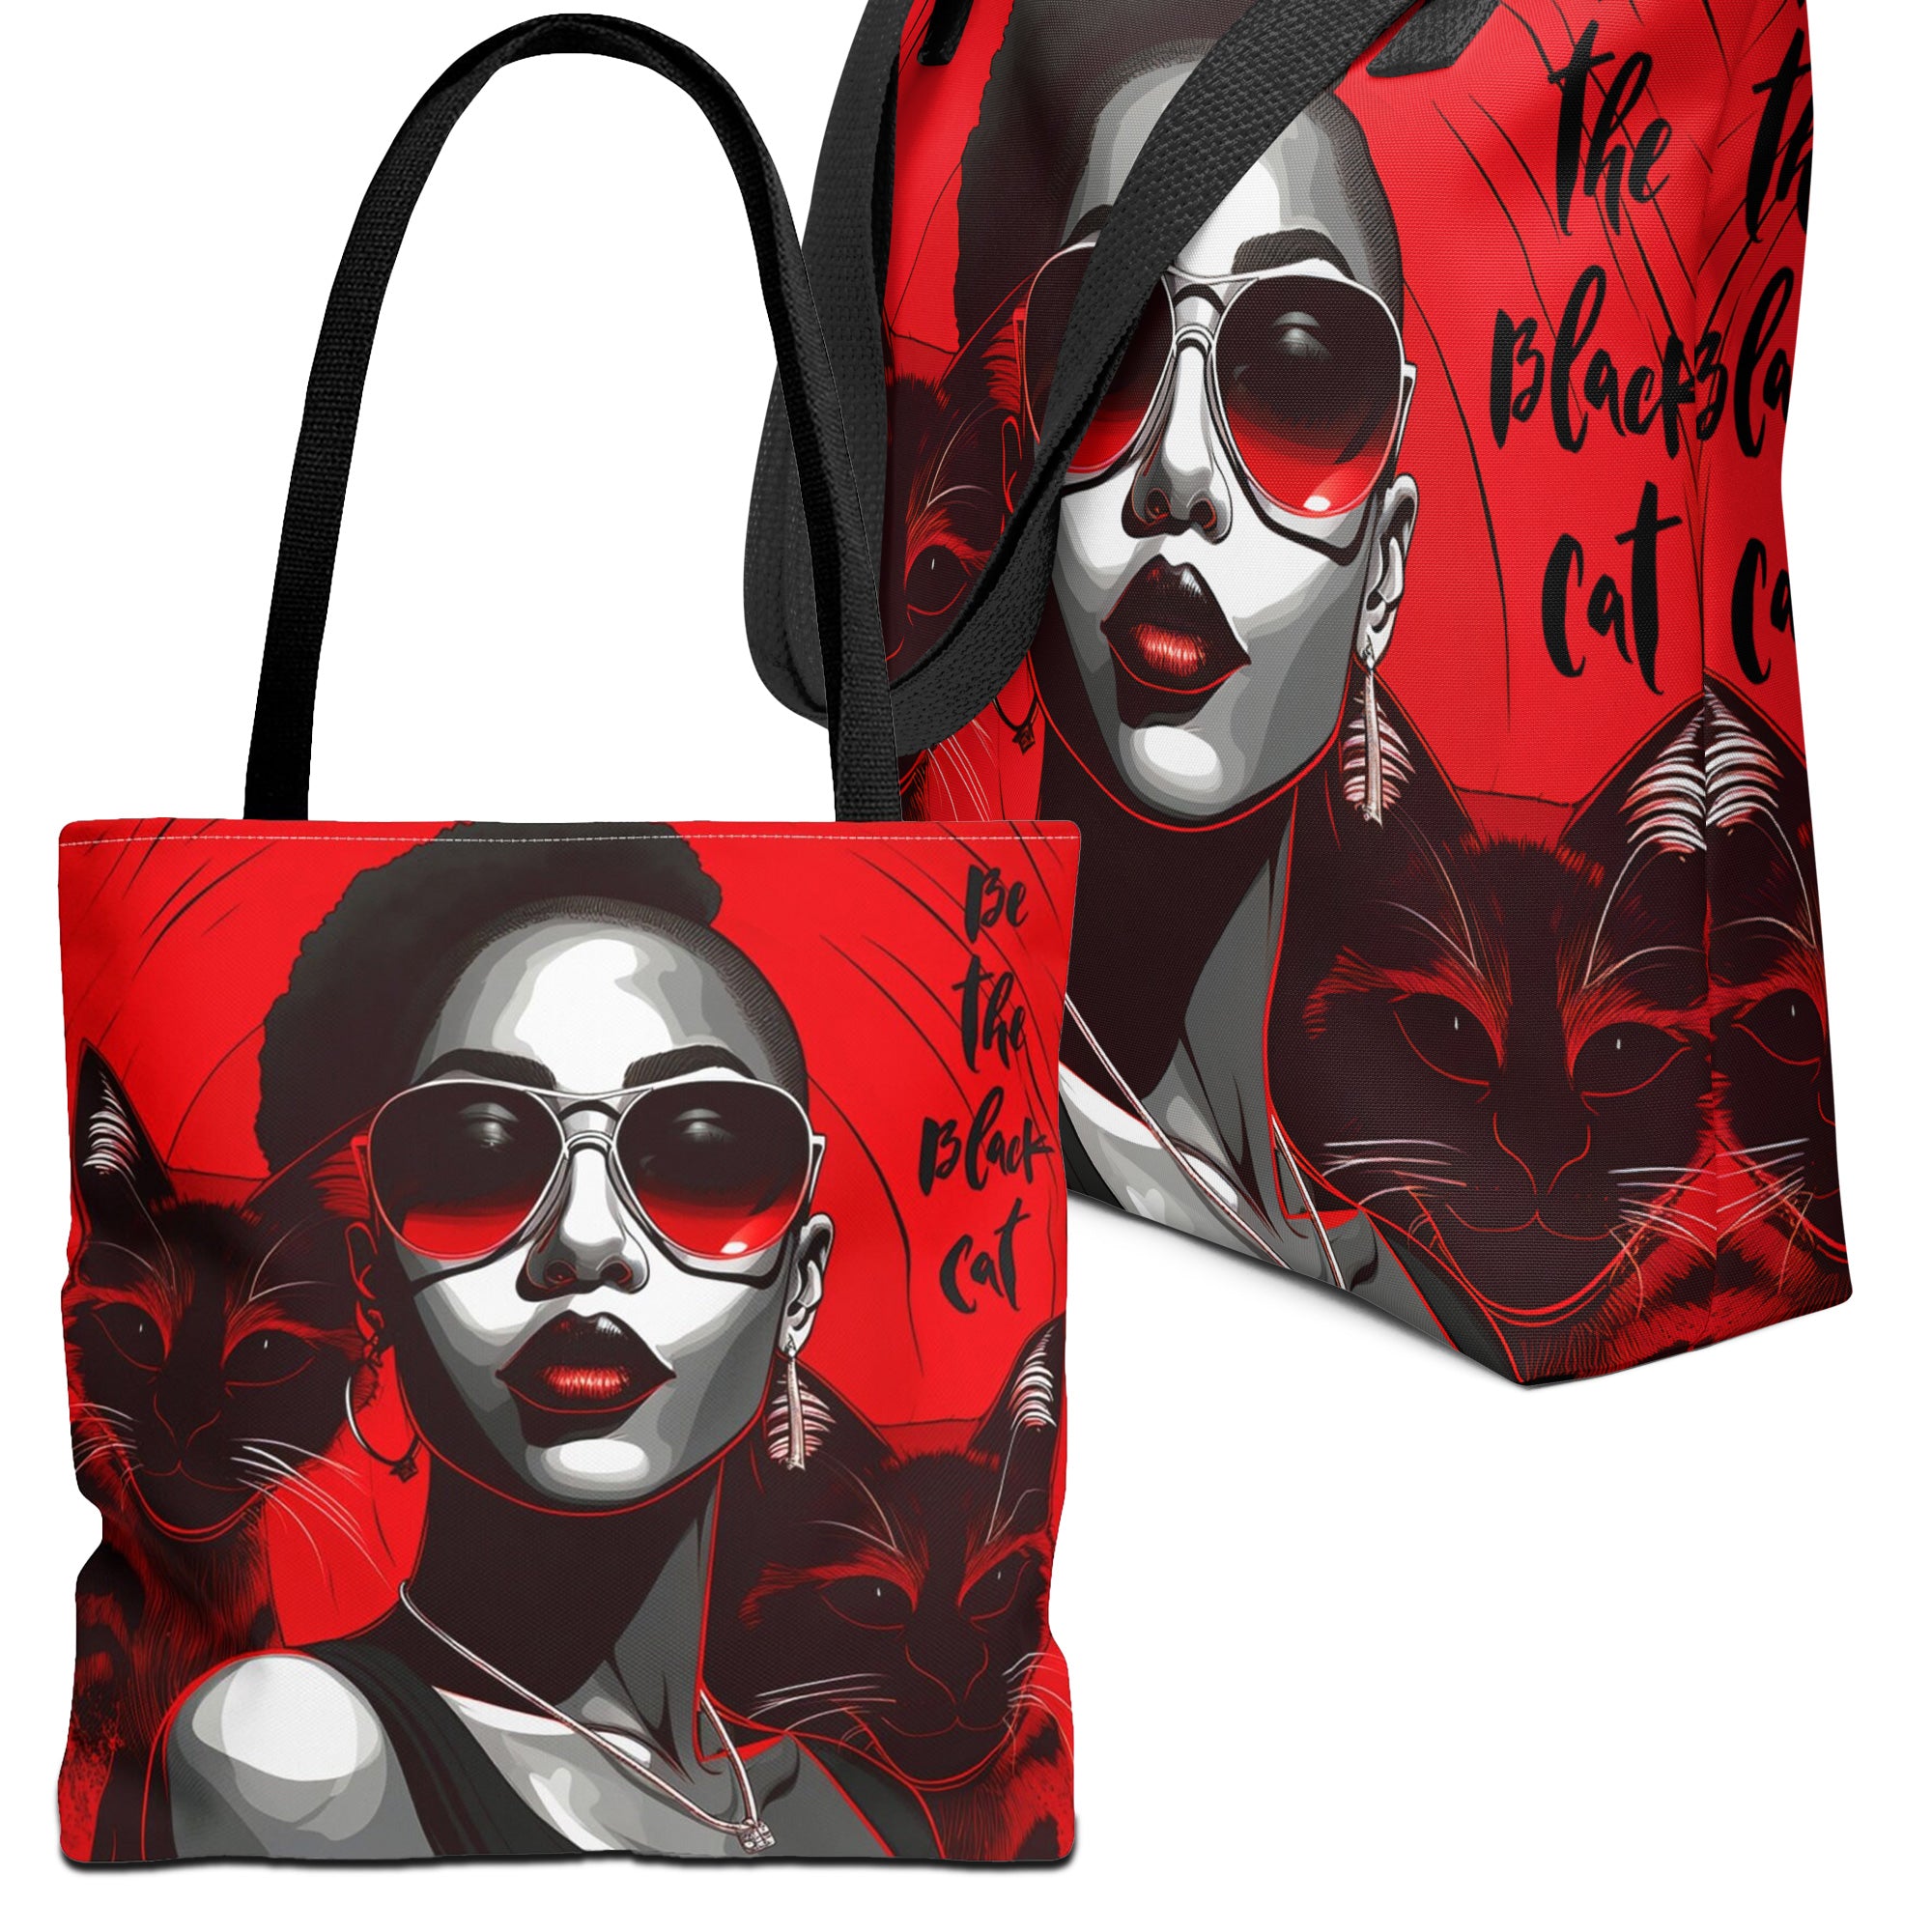 Black Woman Black Cat Tote Bag - front  and side views.